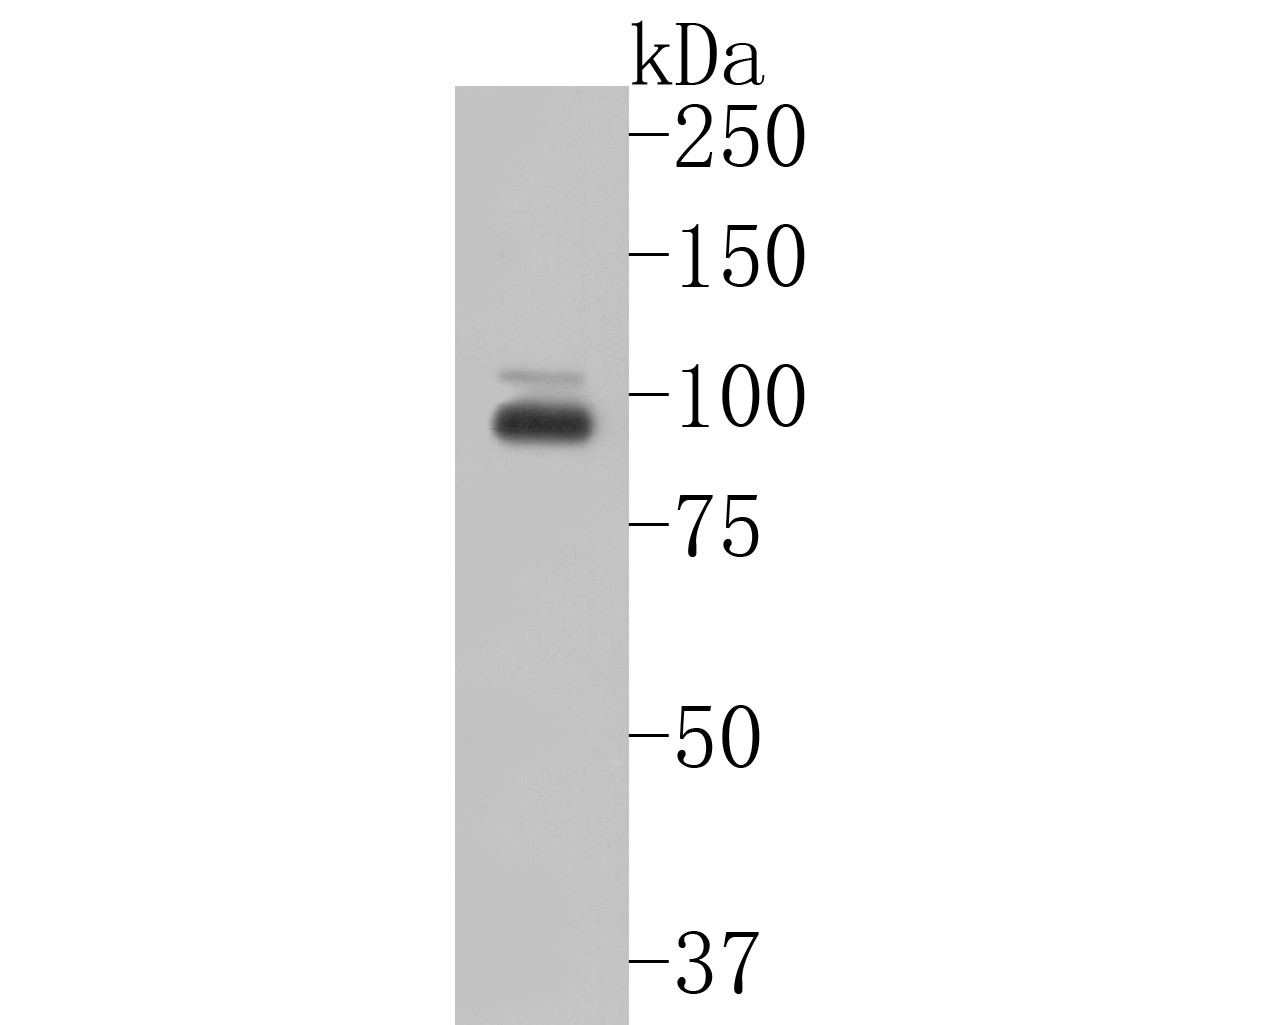 Western blot analysis of CLEC4F on SH-SY5Y cell lysates. Proteins were transferred to a PVDF membrane and blocked with 5% BSA in PBS for 1 hour at room temperature. The primary antibody (EM1901-63, 1/500) was used in 5% BSA at room temperature for 2 hours. Goat Anti-Mouse IgG - HRP Secondary Antibody (HA1006) at 1:5,000 dilution was used for 1 hour at room temperature.